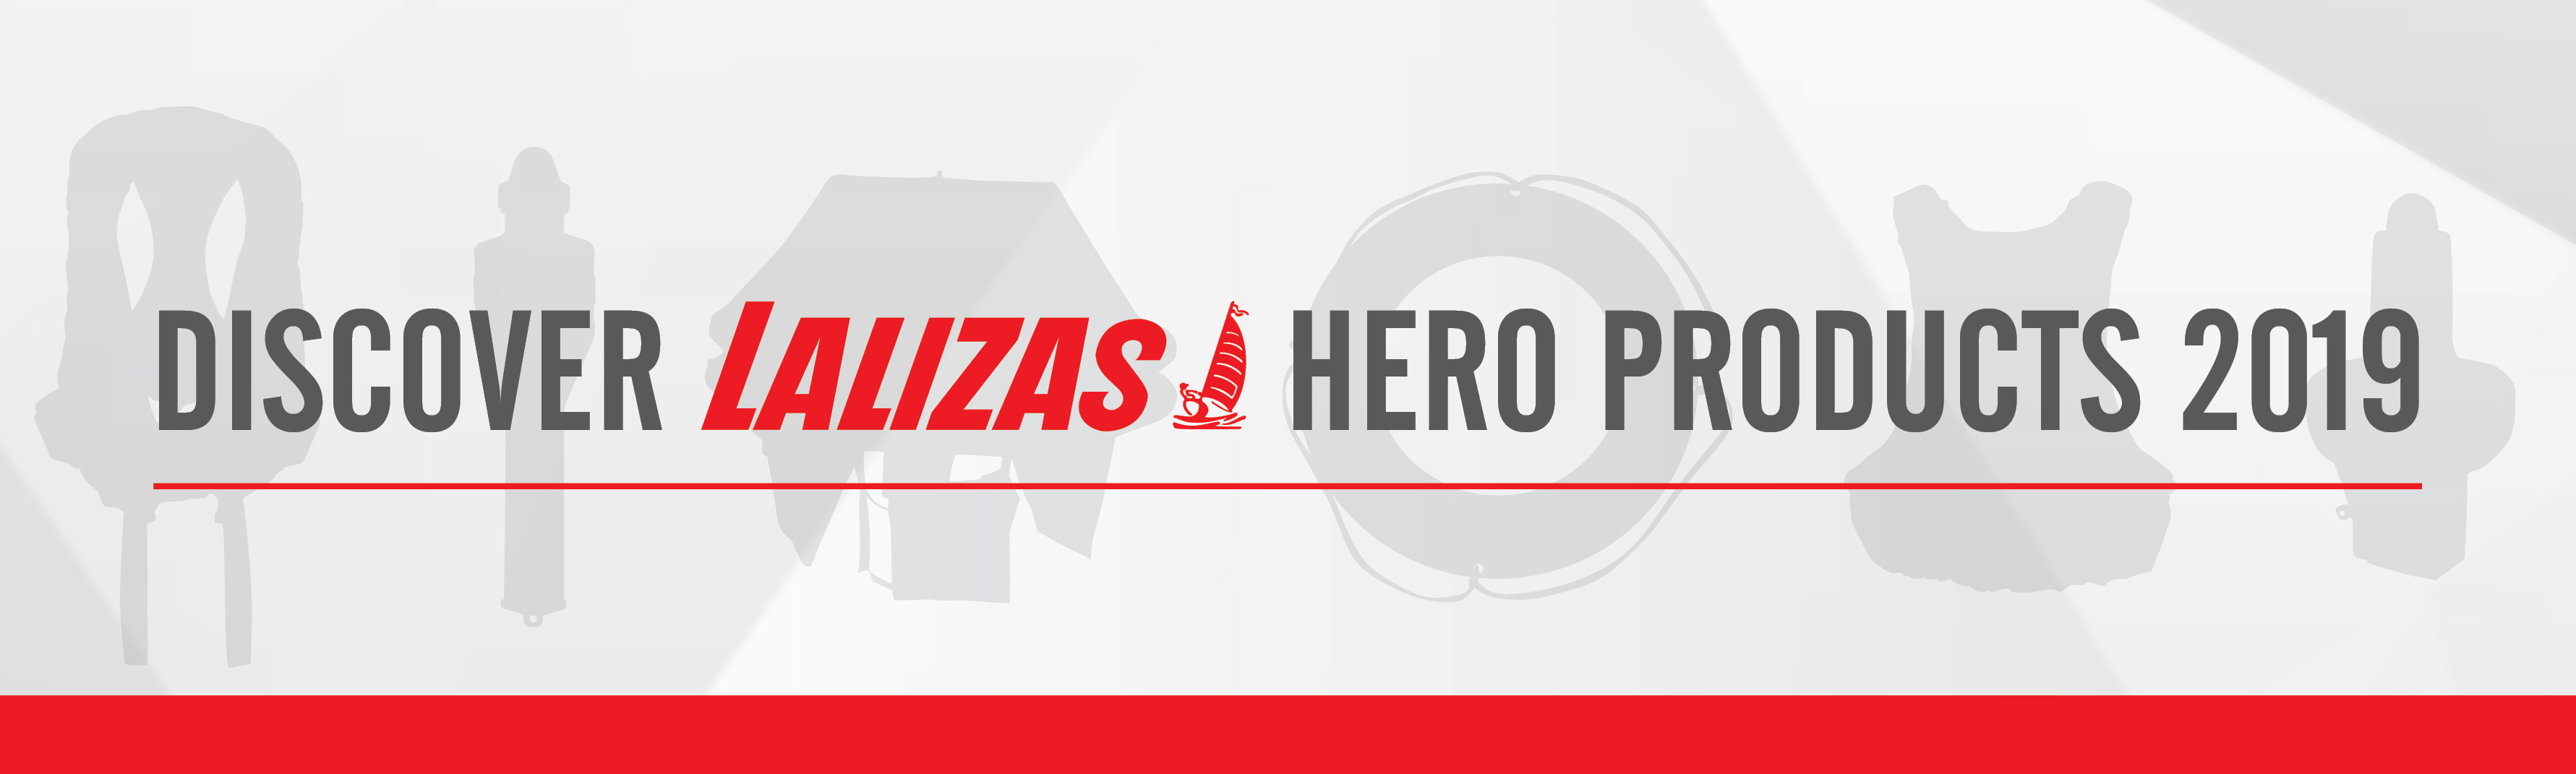 It’s time to discover the LALIZAS Hero Products 2019!